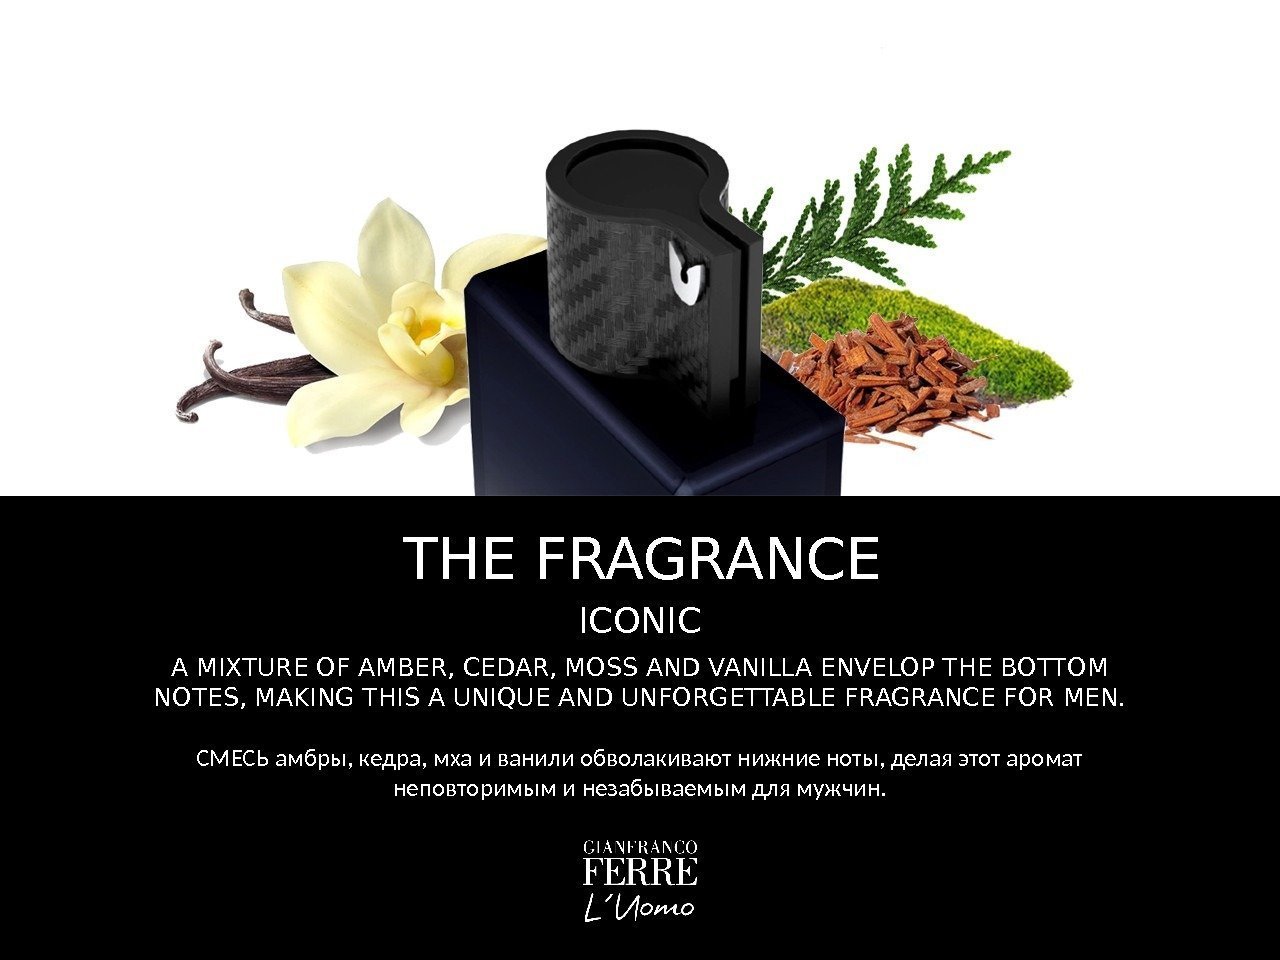 THE FRAGRANCE ICONIC A MIXTURE OF AMBER, CEDAR, MOSS AND VANILLA ENVELOP THE BOTTOM